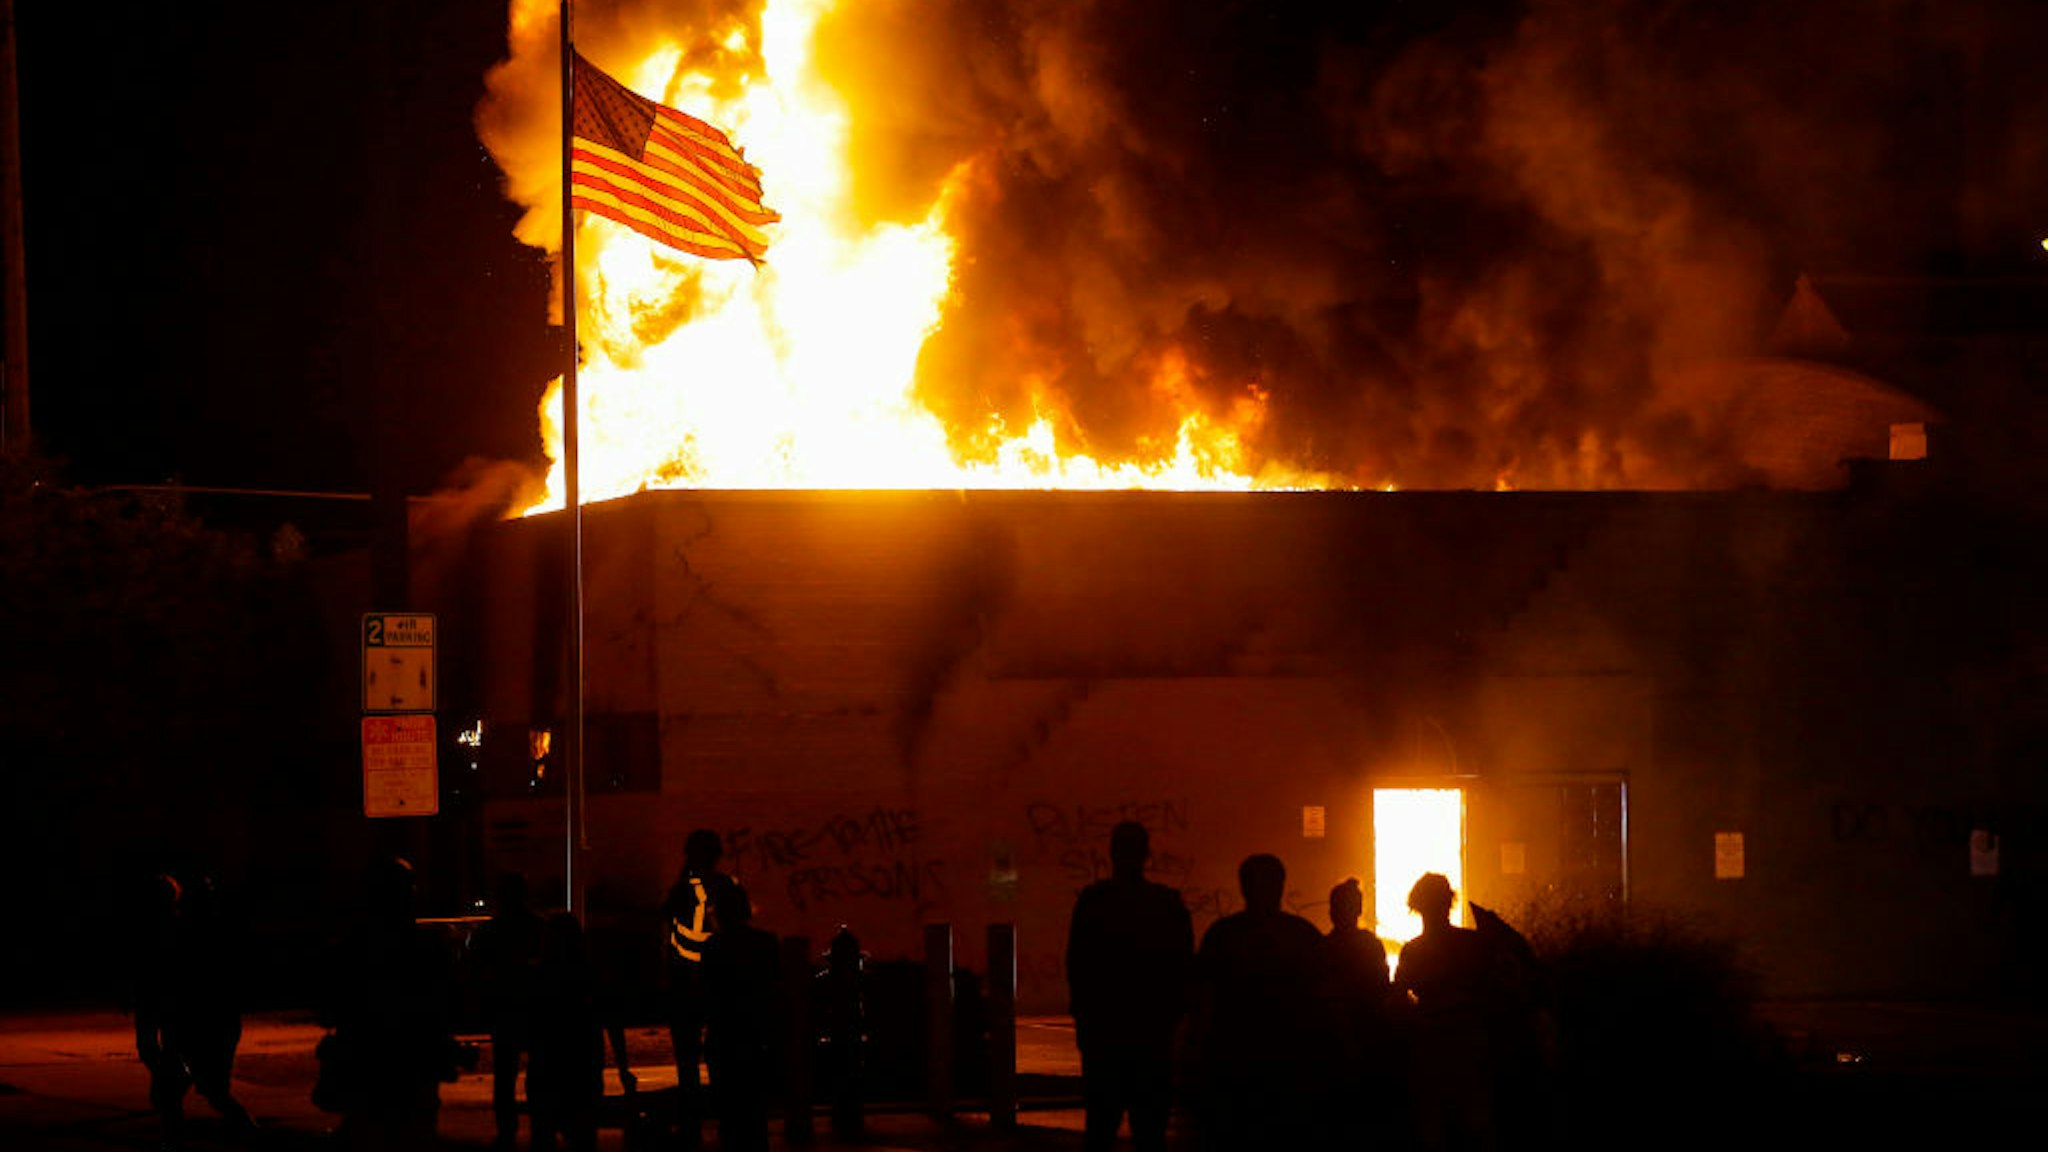 KENOSHA, WI - AUGUST 24: People watch a the American flag flies over a burning building during a riot as demonstrators protest the police shooting of Jacob Blake on Monday, August 24, 2020 in Kenosha, Wisconsin. Blake was shot in the back multiple times by police officers responding to a domestic dispute call yesterday.